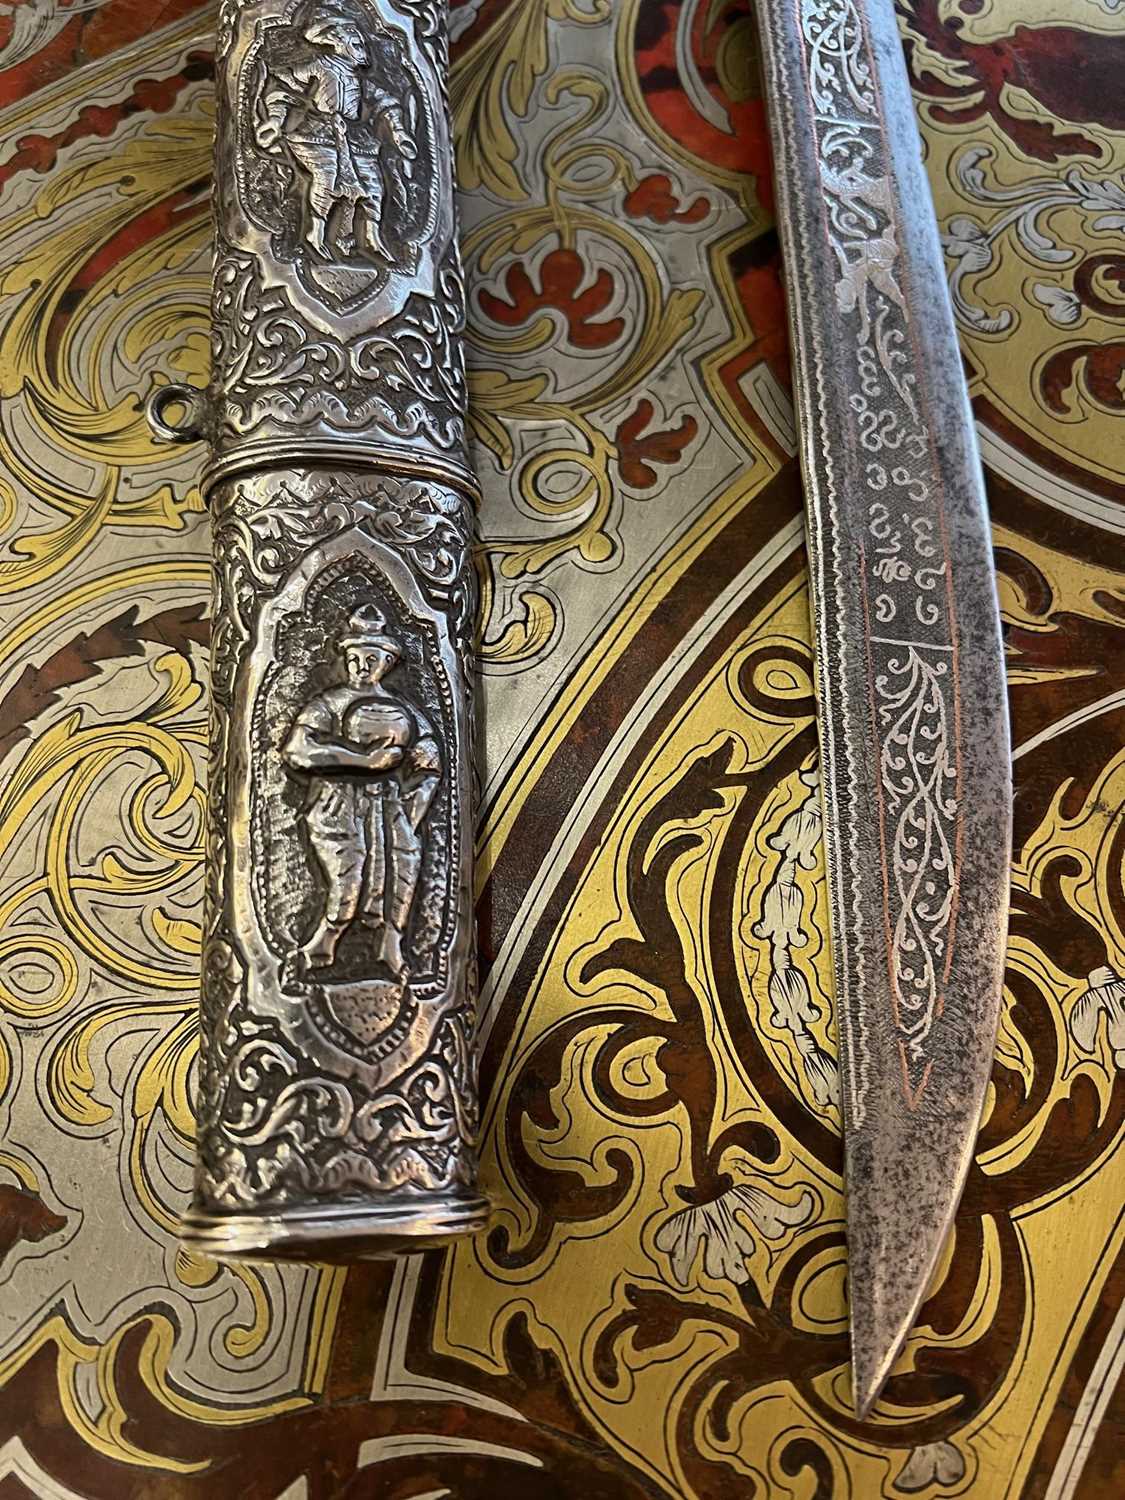 A BURMESE SILVER MOUNTED PRESENTATION SWORD (DHA), LATE 19TH / 20TH CENTURY - Image 3 of 12